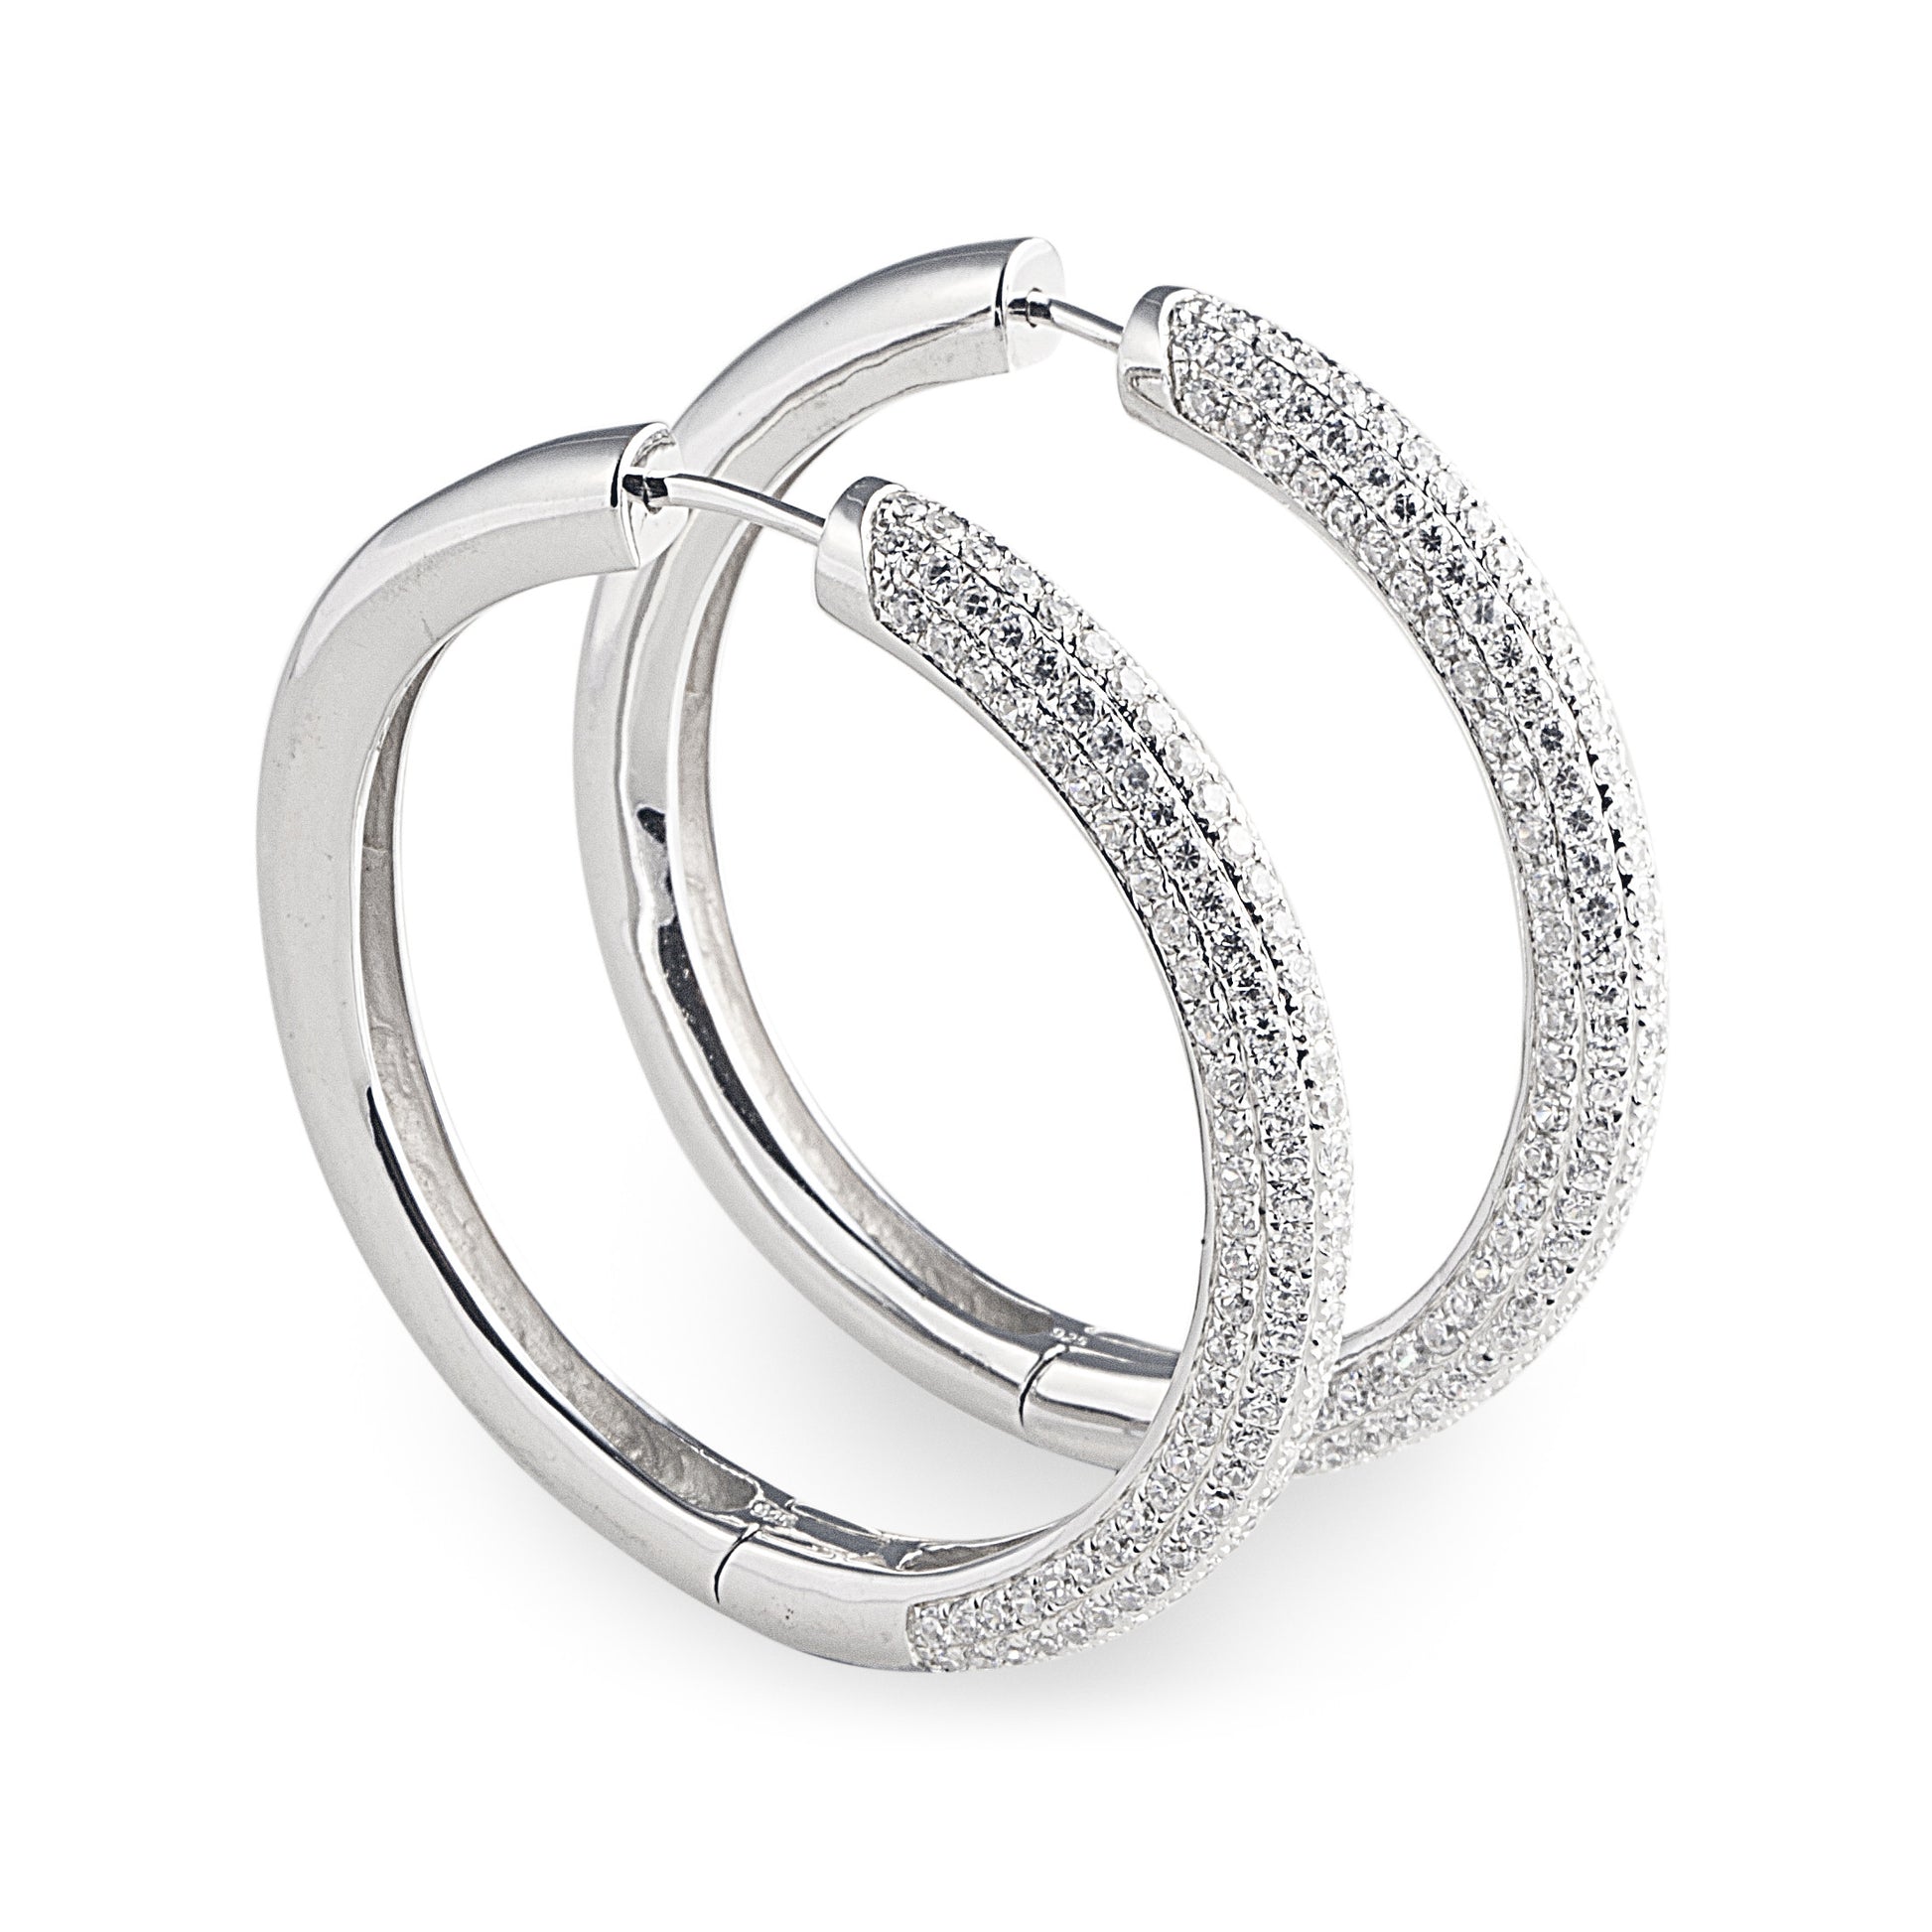 large-sized J-Lo Hoop Earrings in 925 Sterling Silver with 9ct white gold posts, featuring pavé set cubic zirconia stones. Worldwide Shipping. Affordable luxury jewellery by Bellagio & Co.